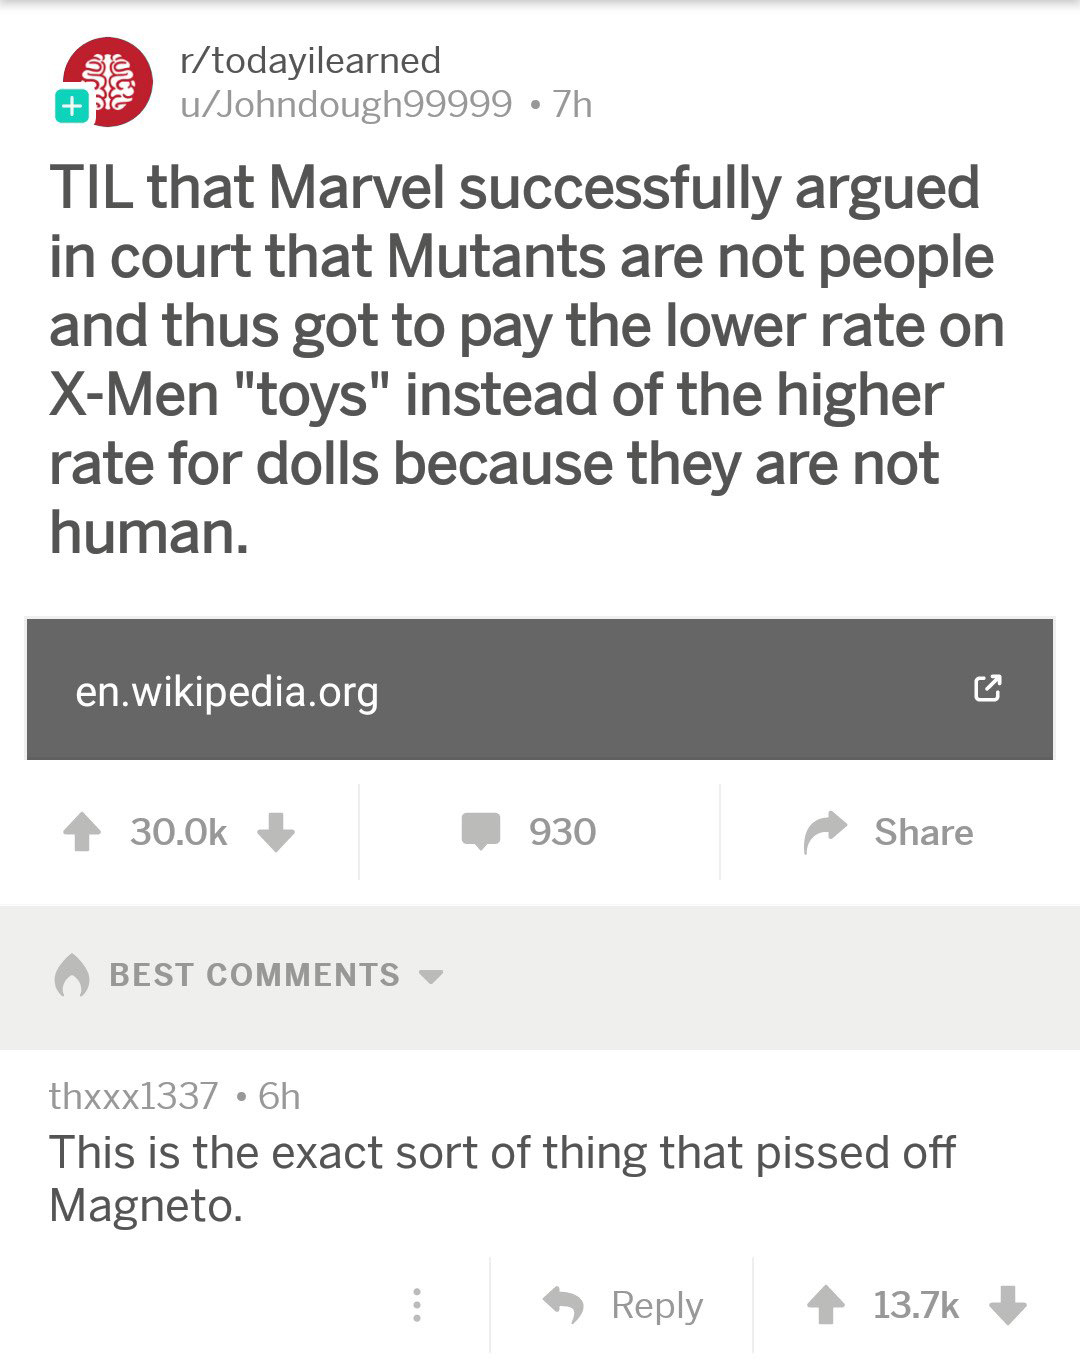 Til that Marvel successfully argued in court that Mutants are not people and thus got to pay the lower rate on XMen